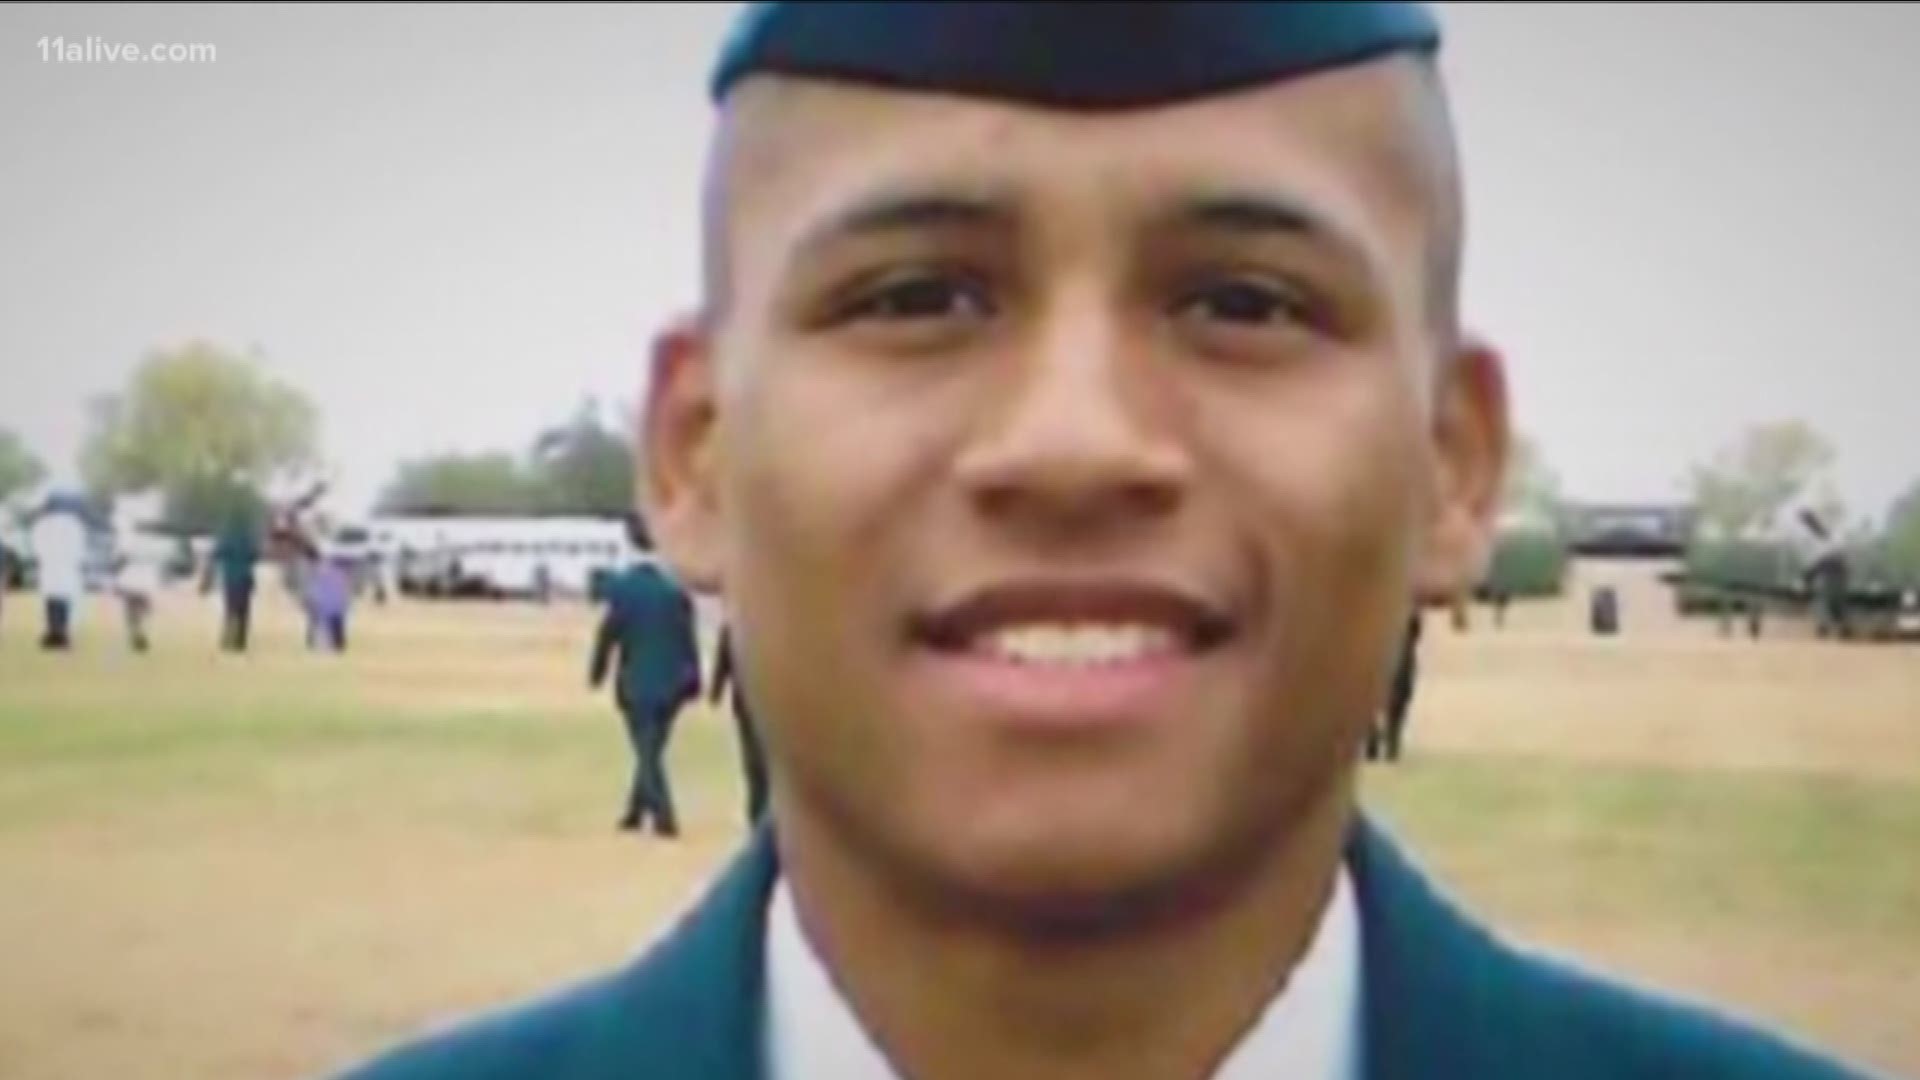 The officer has claimed he acted in self-defense when he shot and killed the unarmed Air Force veteran, who was naked at the time of the shooting.